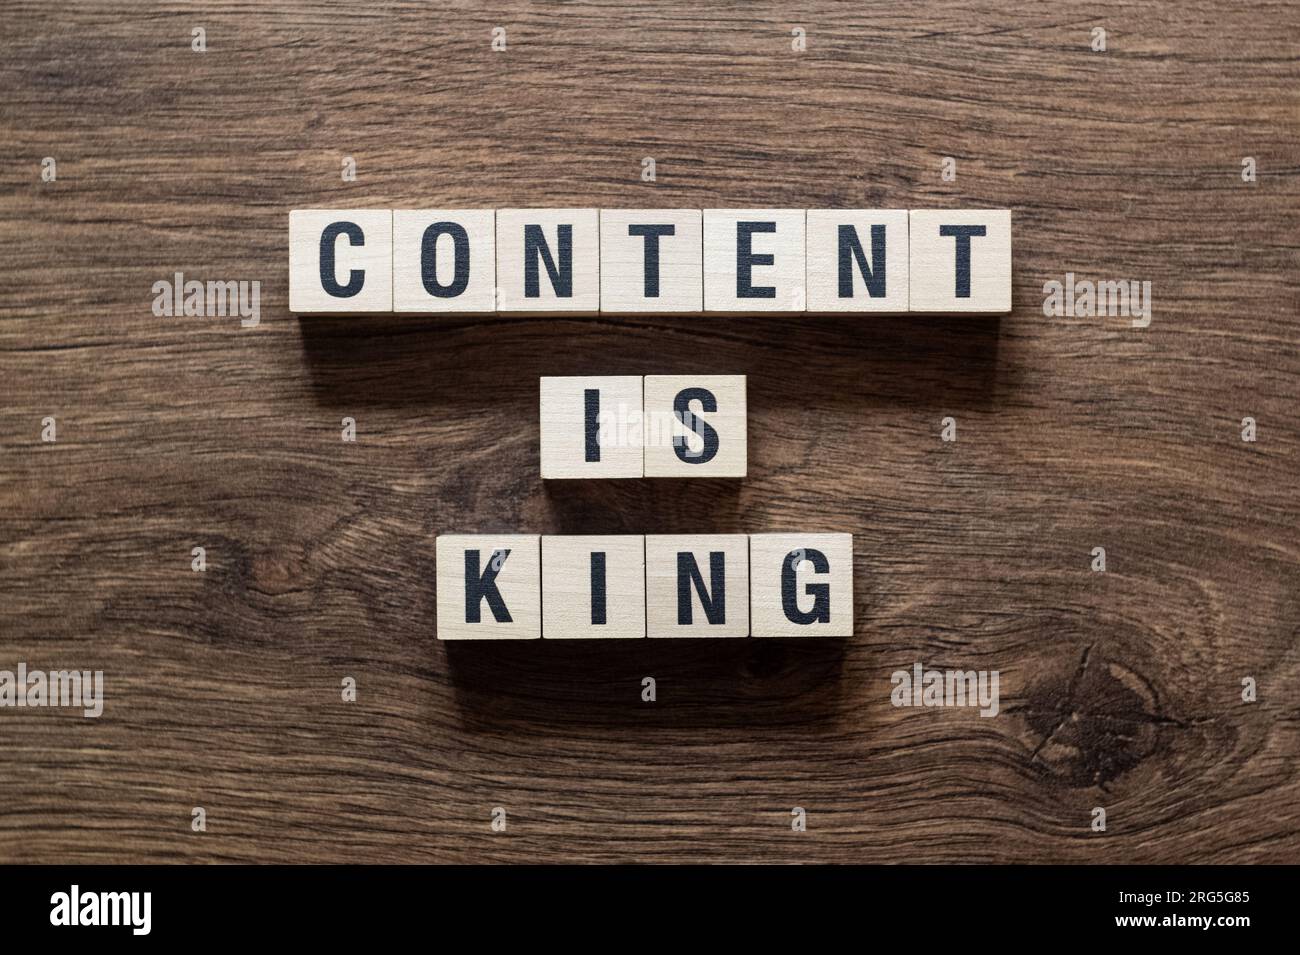 Content is king - word concept on building blocks, text Stock Photo